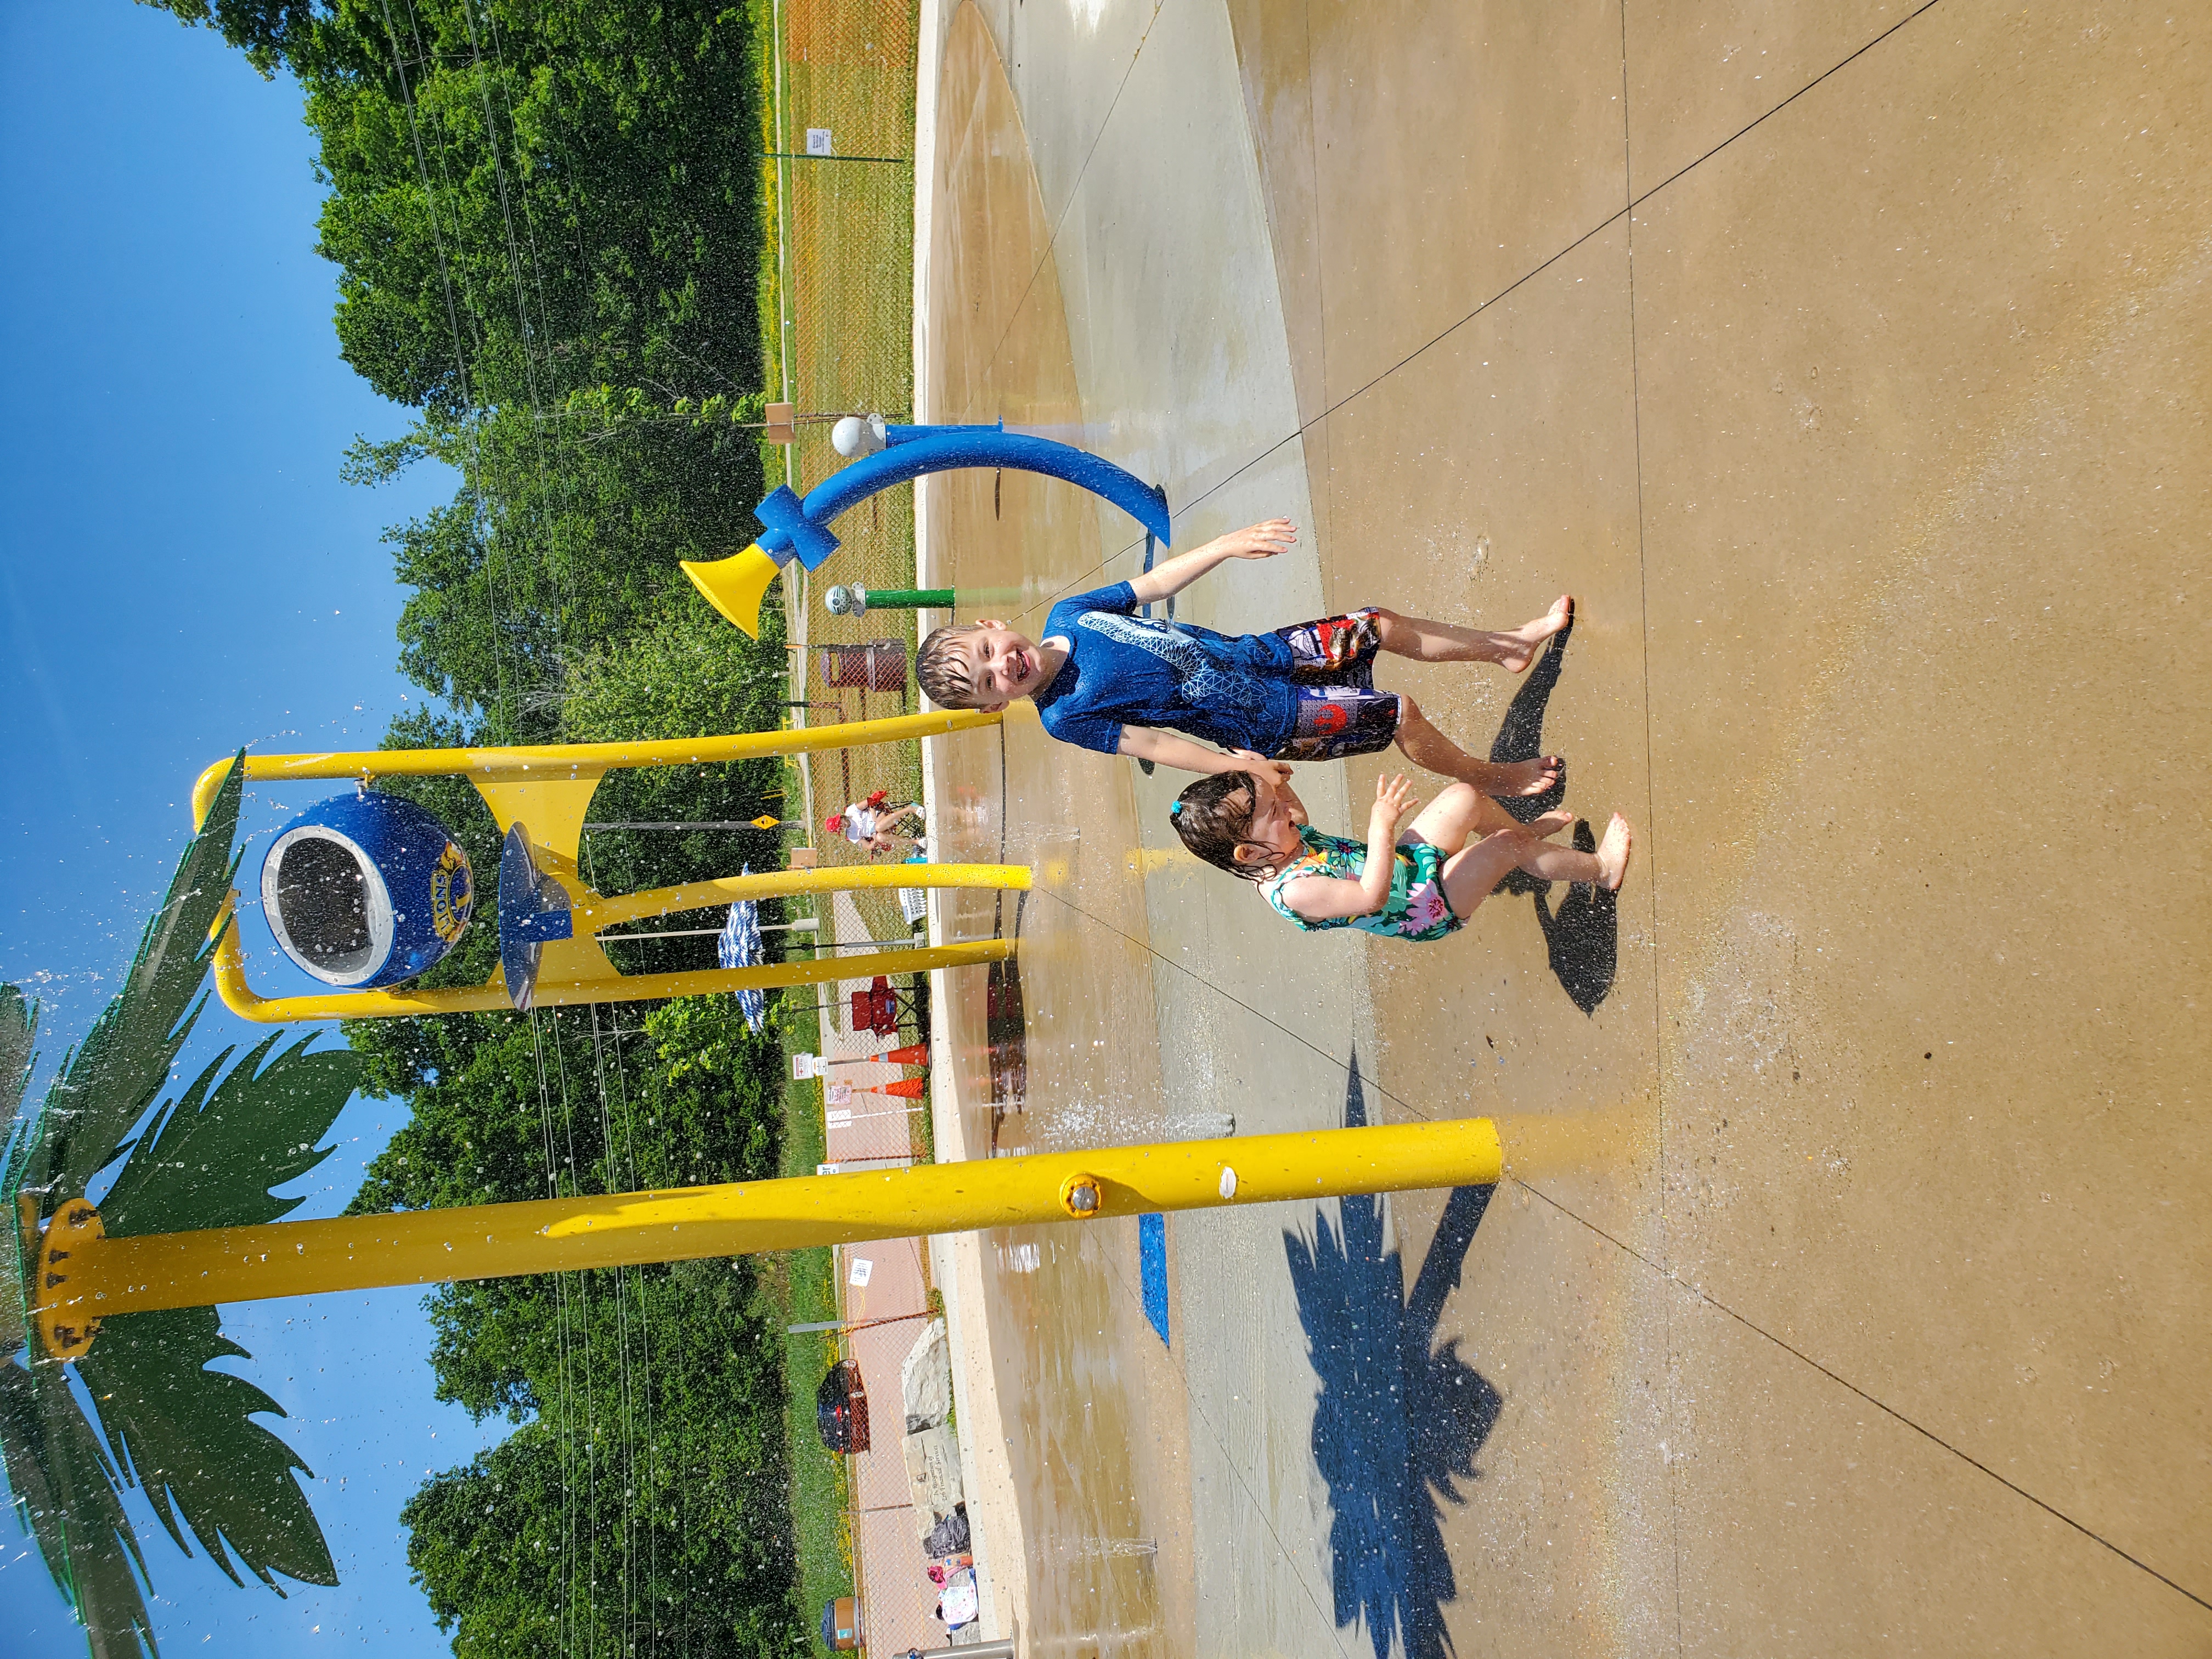 Two young children play in the splash pad under the tree water feature.